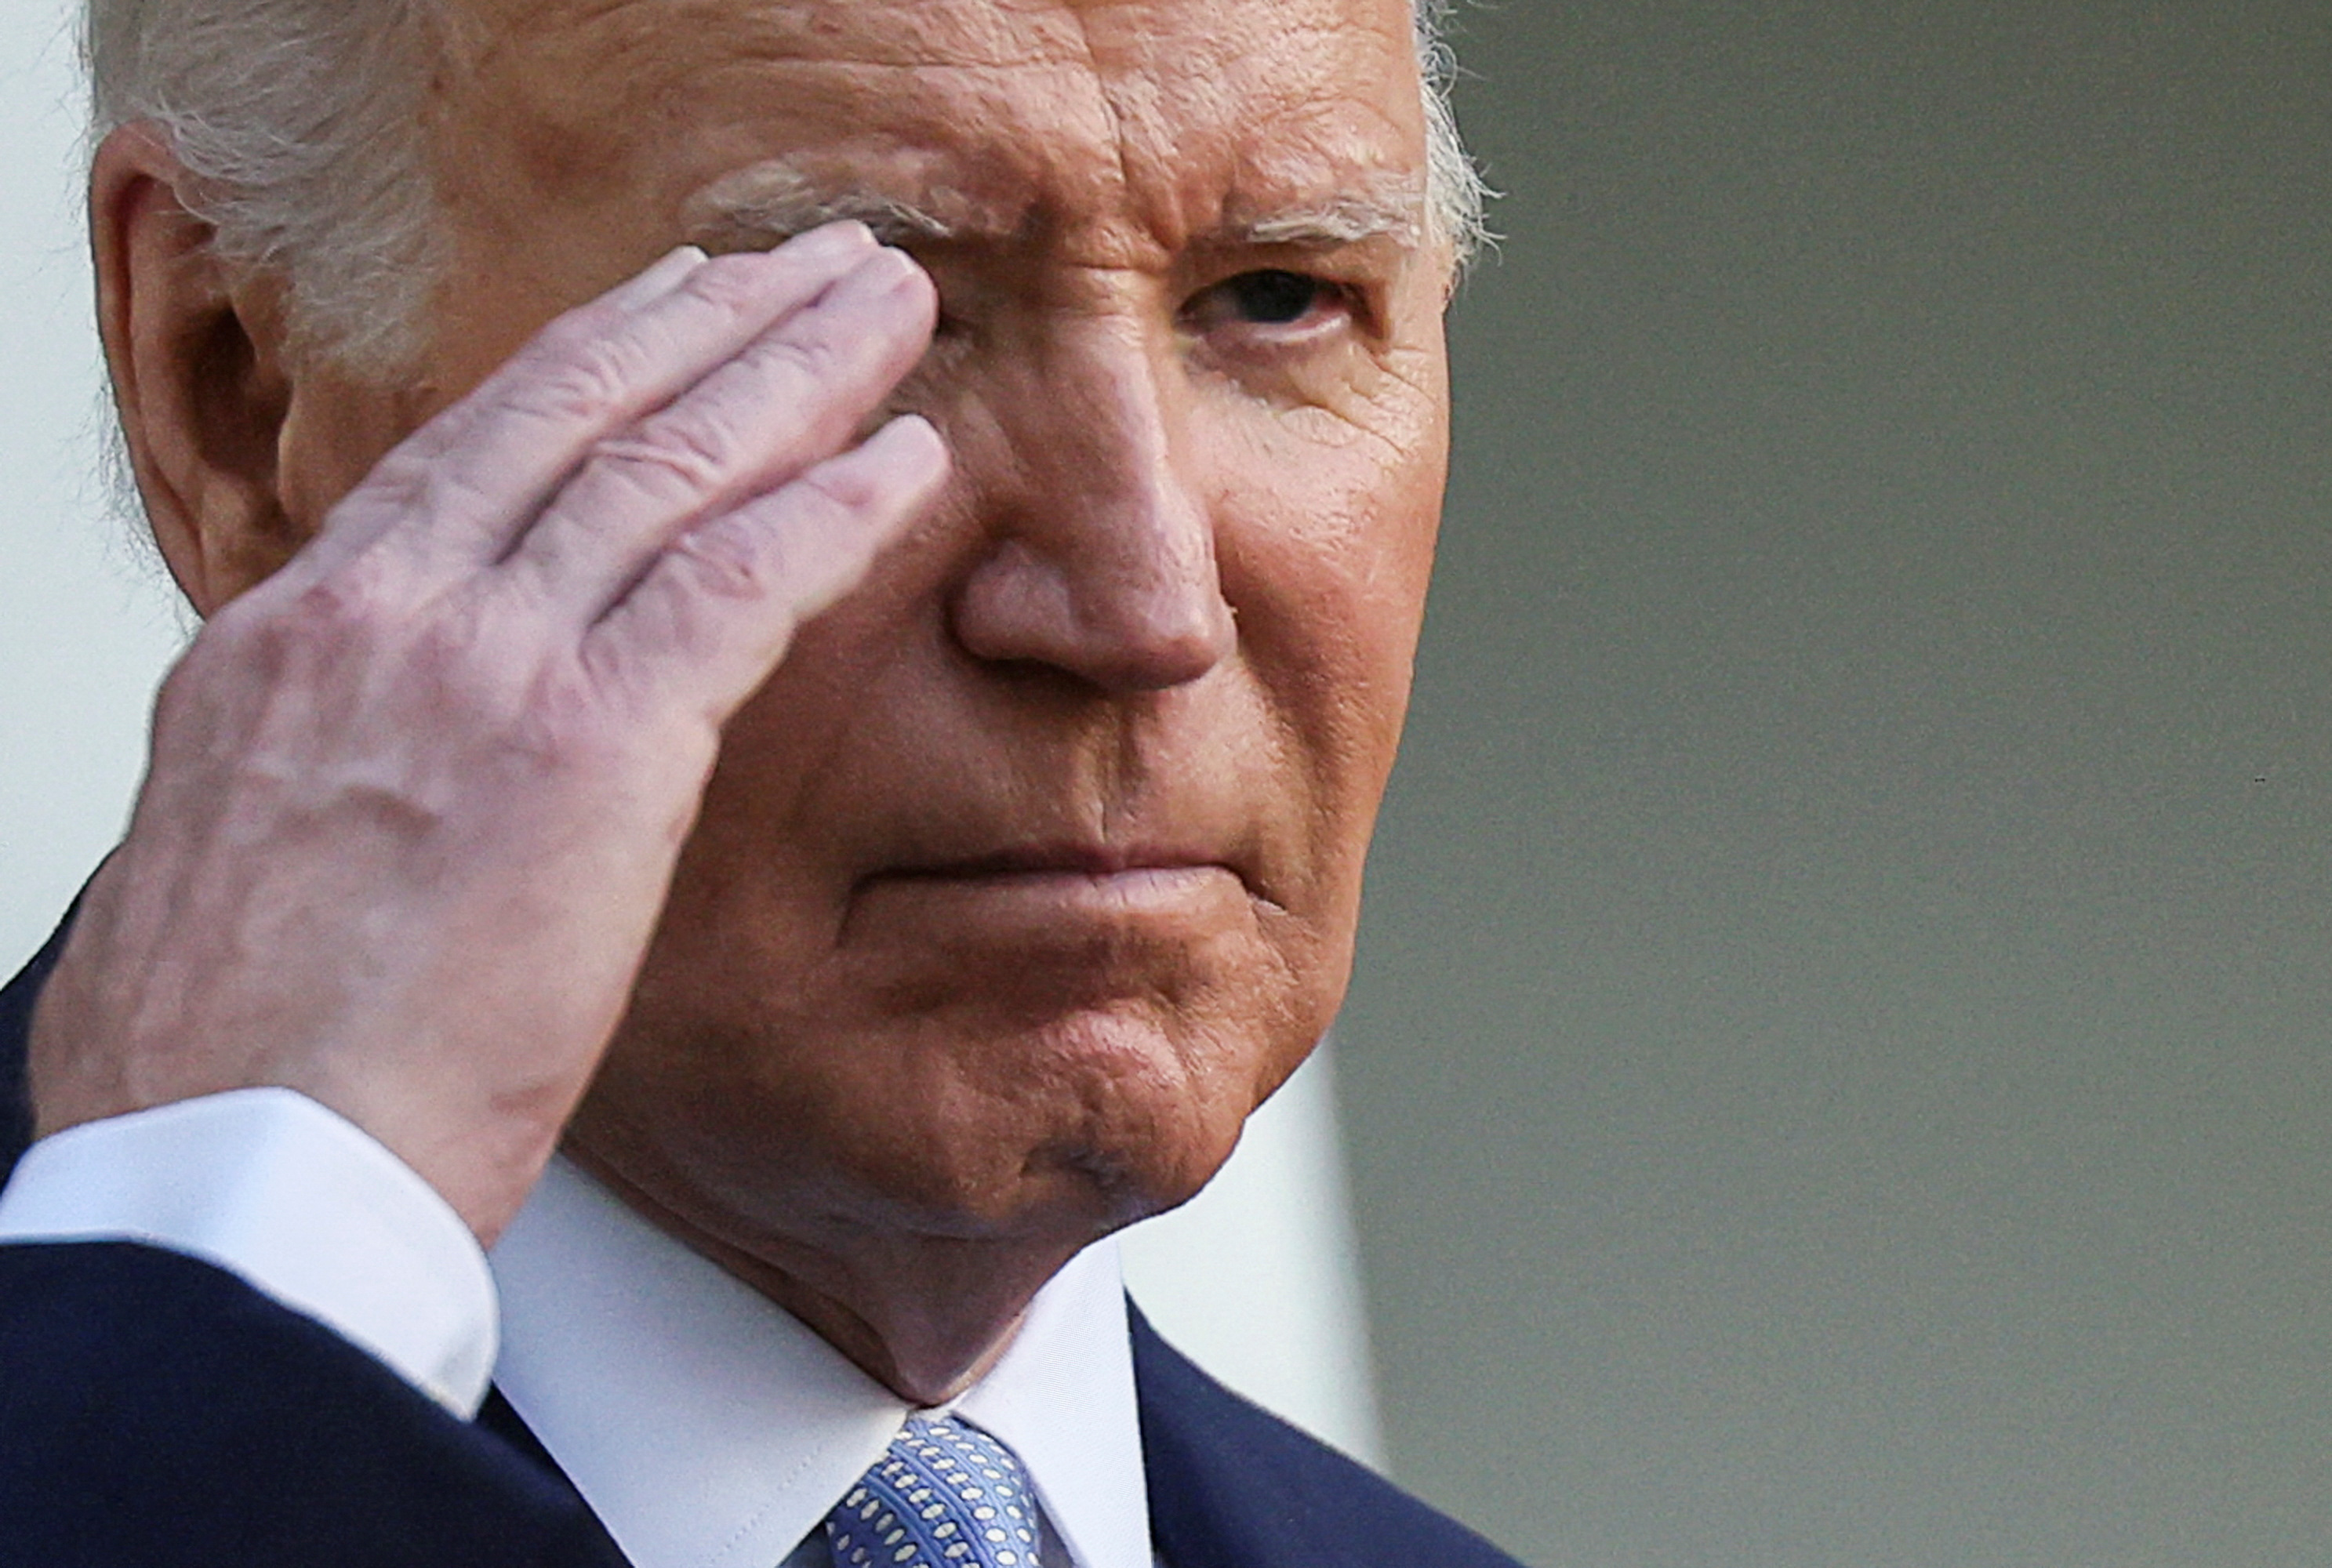 Biden’s approval ratings have fallen to their lowest levels in nearly two years